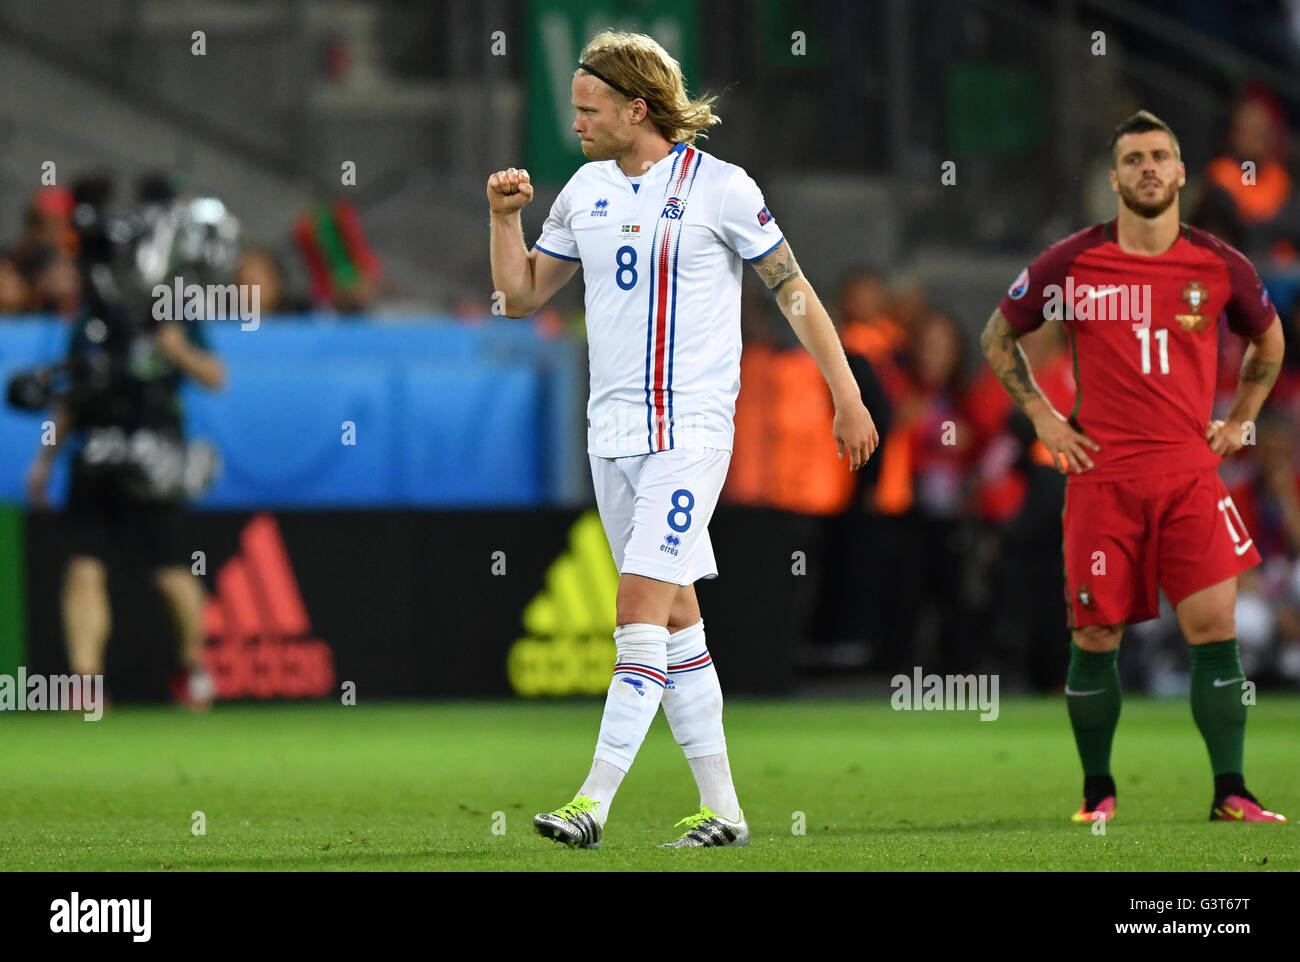 Saint-Etienne, France. 14th June, 2016. Birkir Bjarnason (L) of Iceland celebrates after scoring the equalizer during the UEFA Euro 2016 Group F soccer match Portugal vs. Iceland at Stade Geoffroy Guichard in Saint-Etienne, France, 14 June 2016. Vieirinha (R) of reacts. Photo: Uwe Anspach/dpa/Alamy Live News Stock Photo